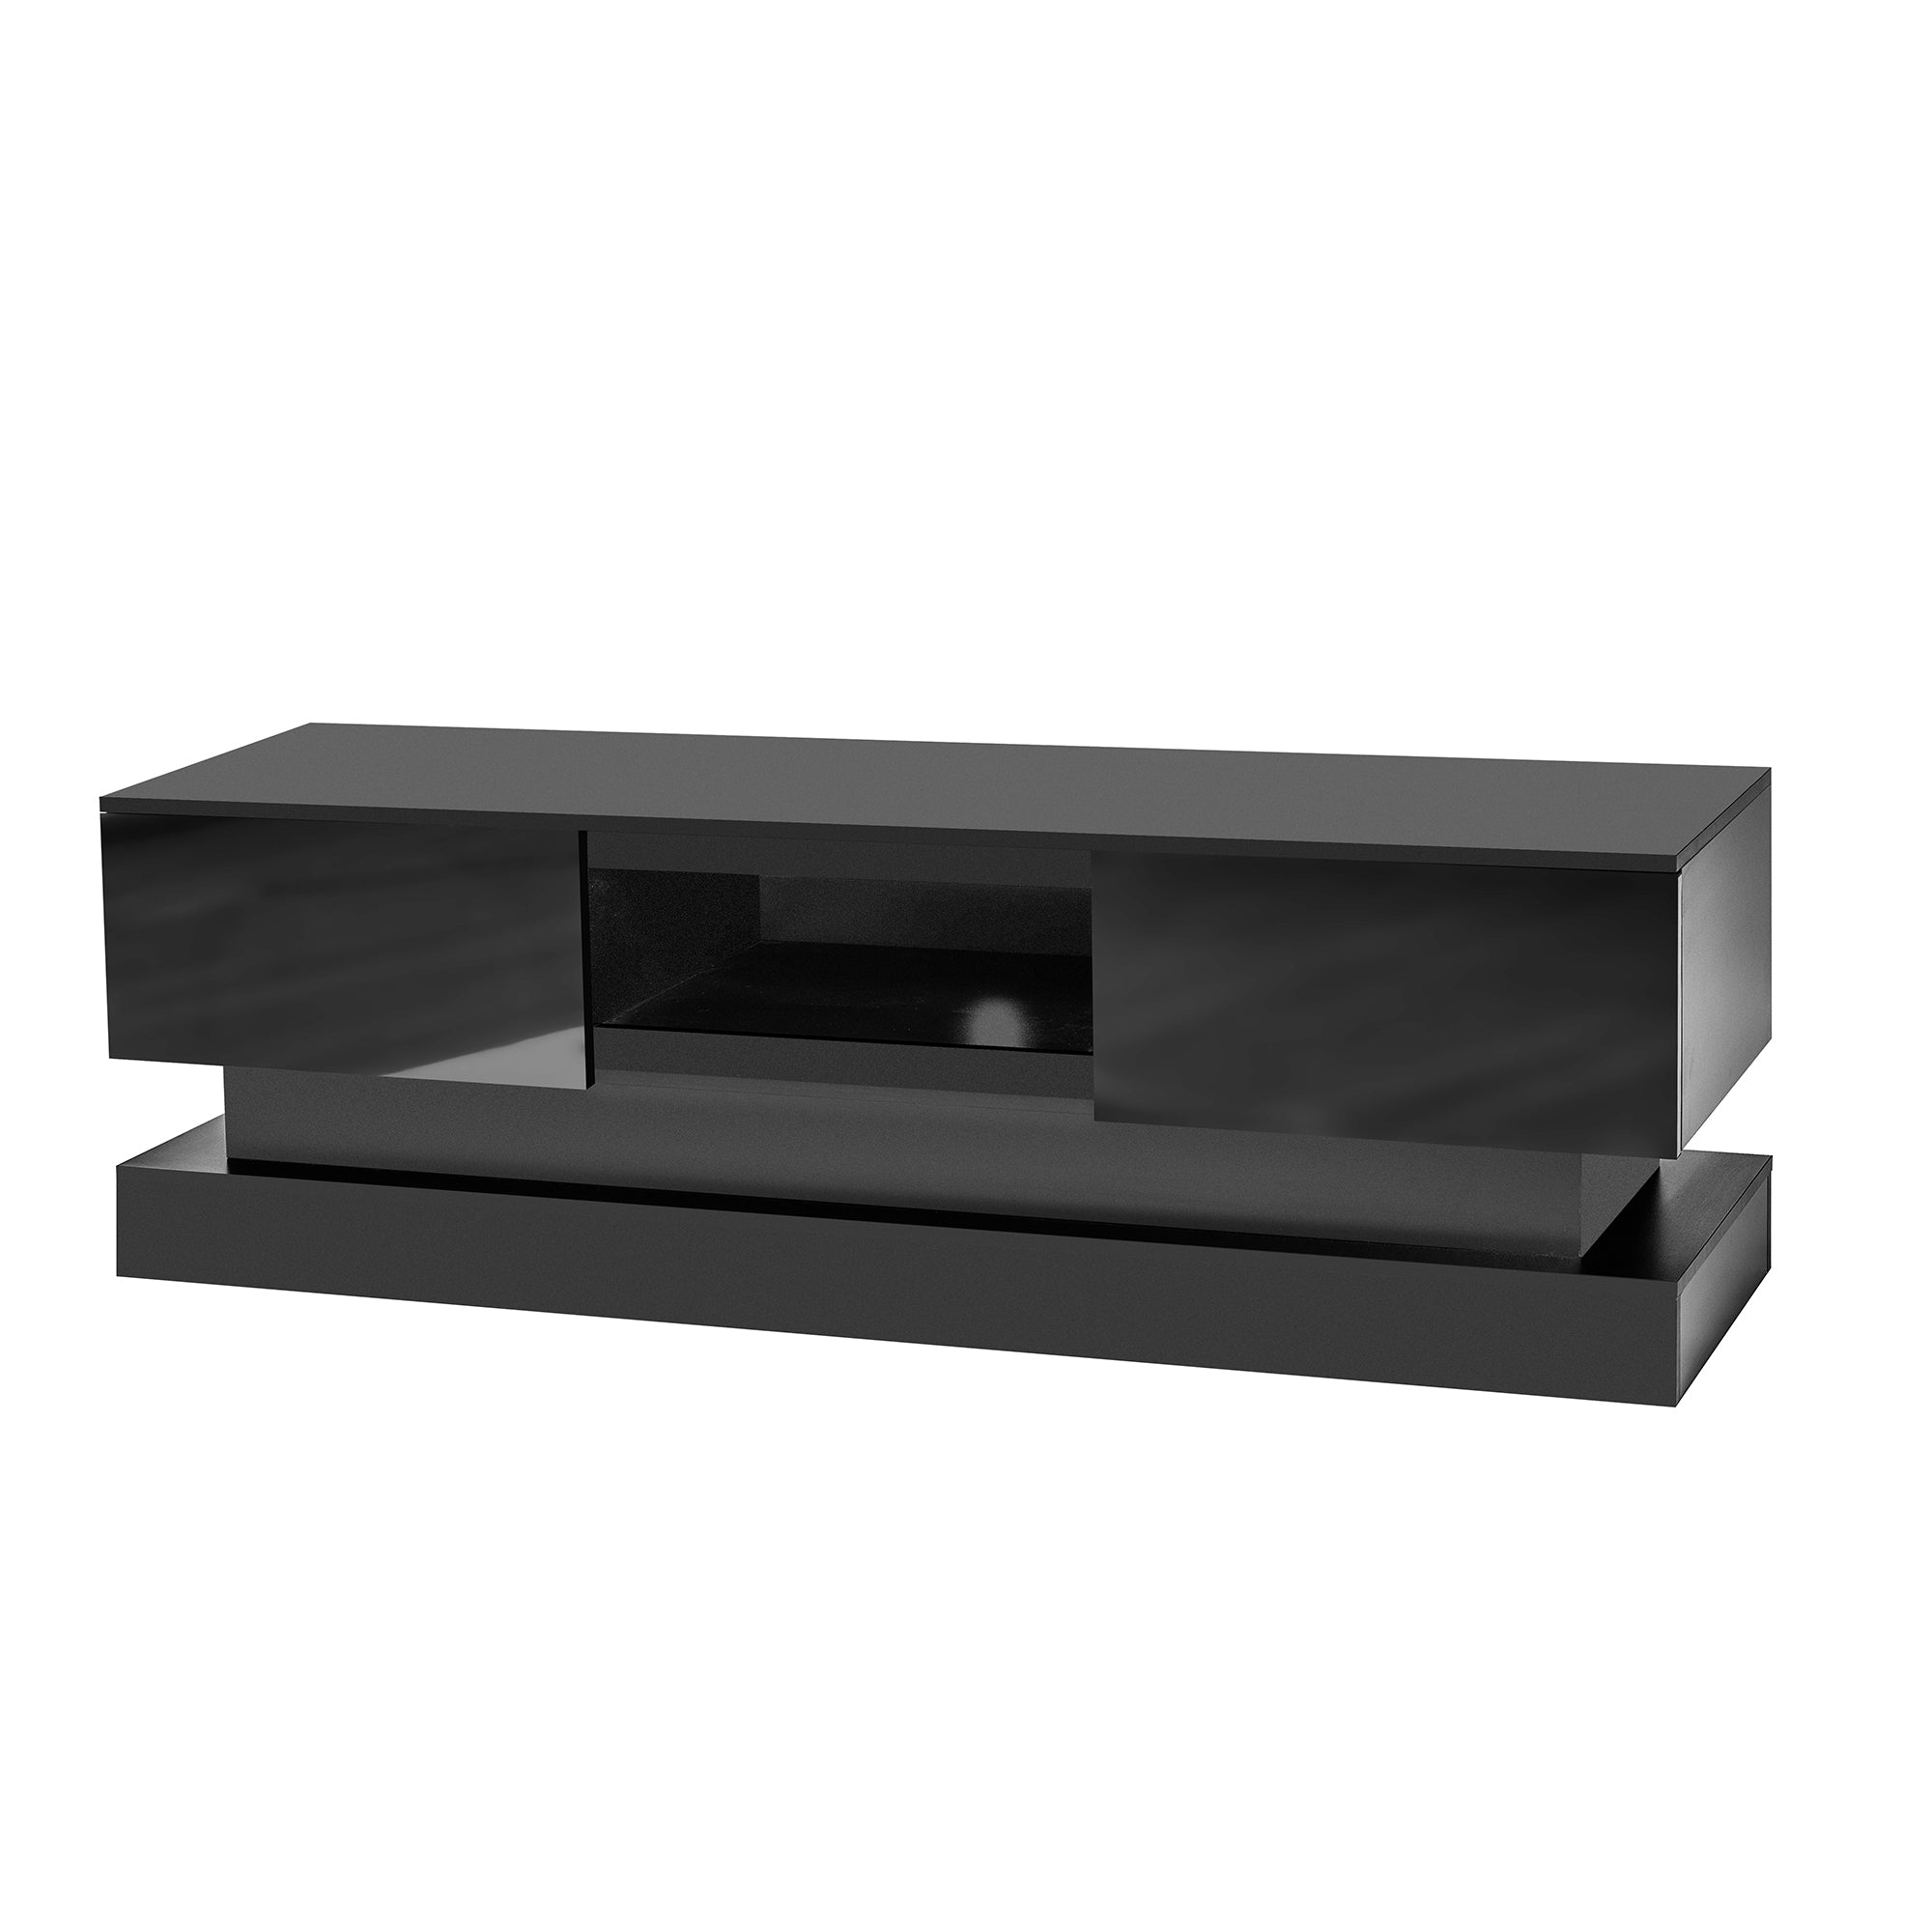 51.18inch Black morden TV Stand with LED Lights,high black-primary living space-50 inches-50-59